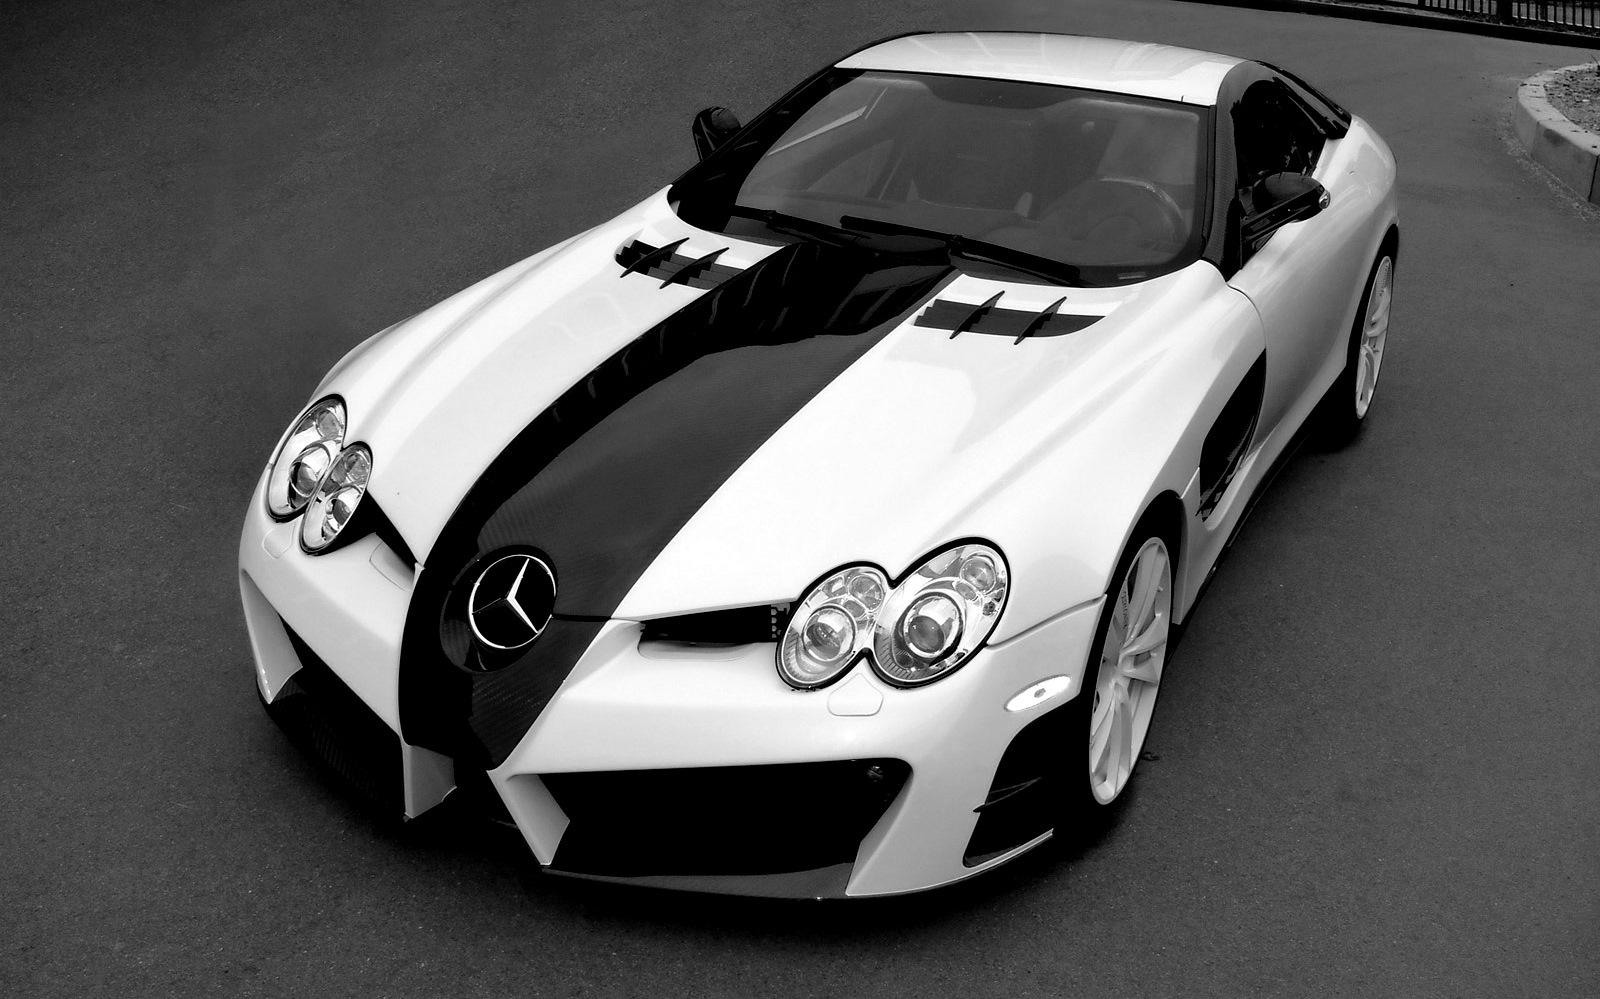 Top 10 High Quality Mercedes Benz Wallpapers - Original Preview ...